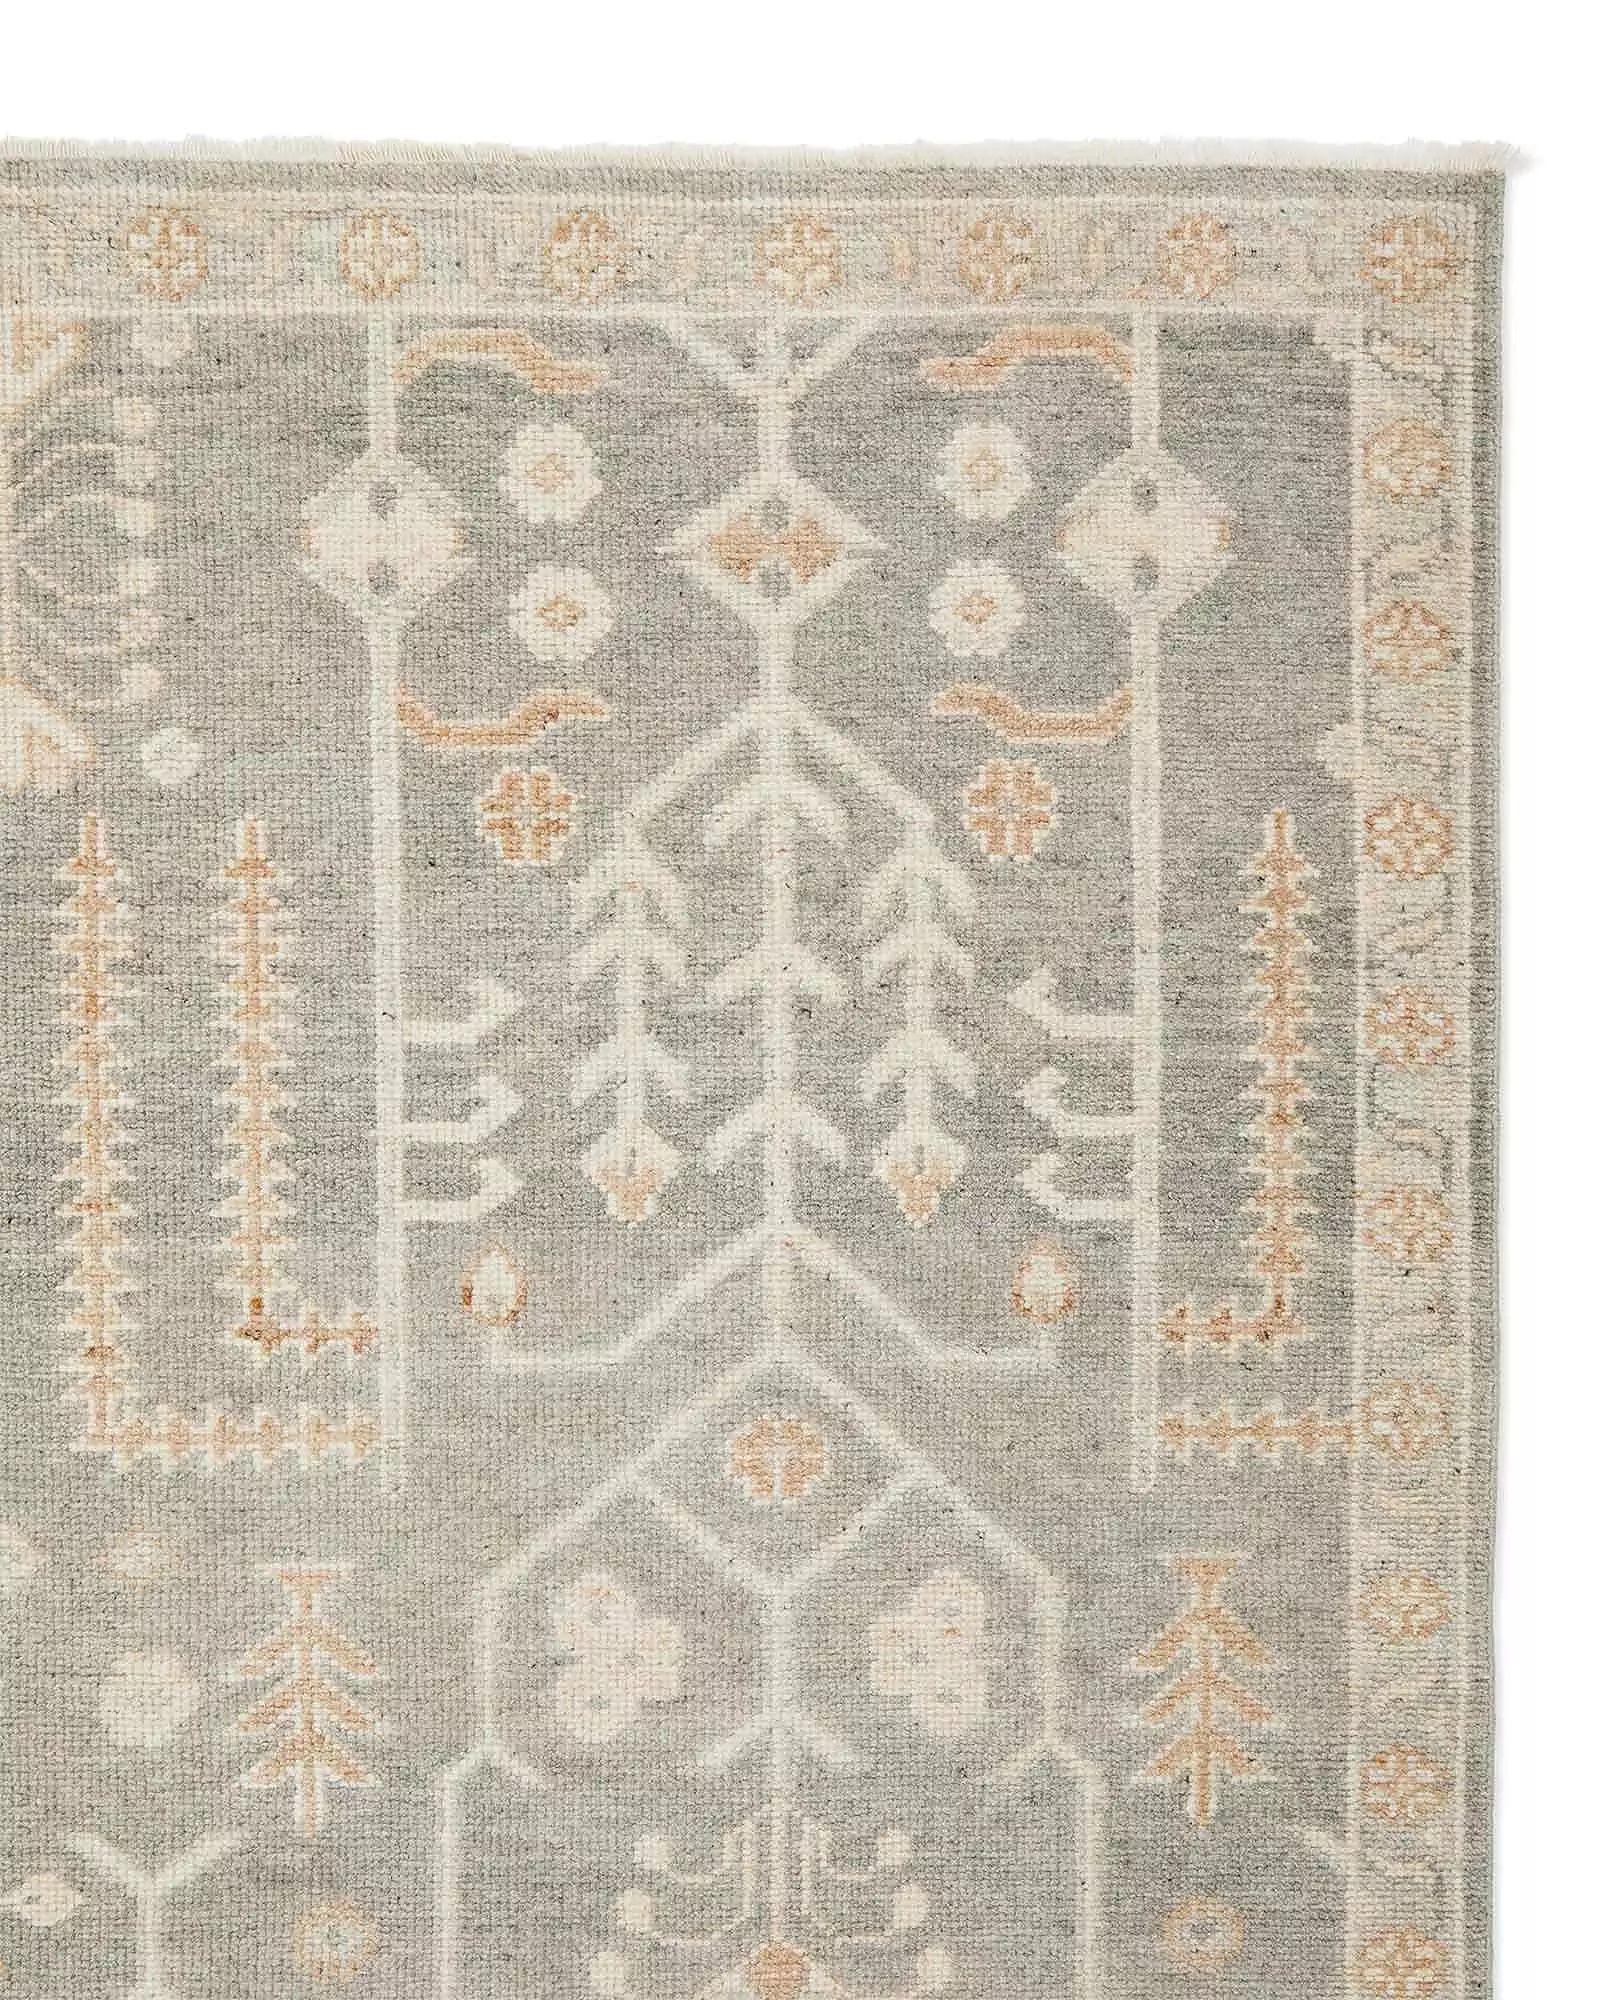 Yountville Rug | Serena and Lily